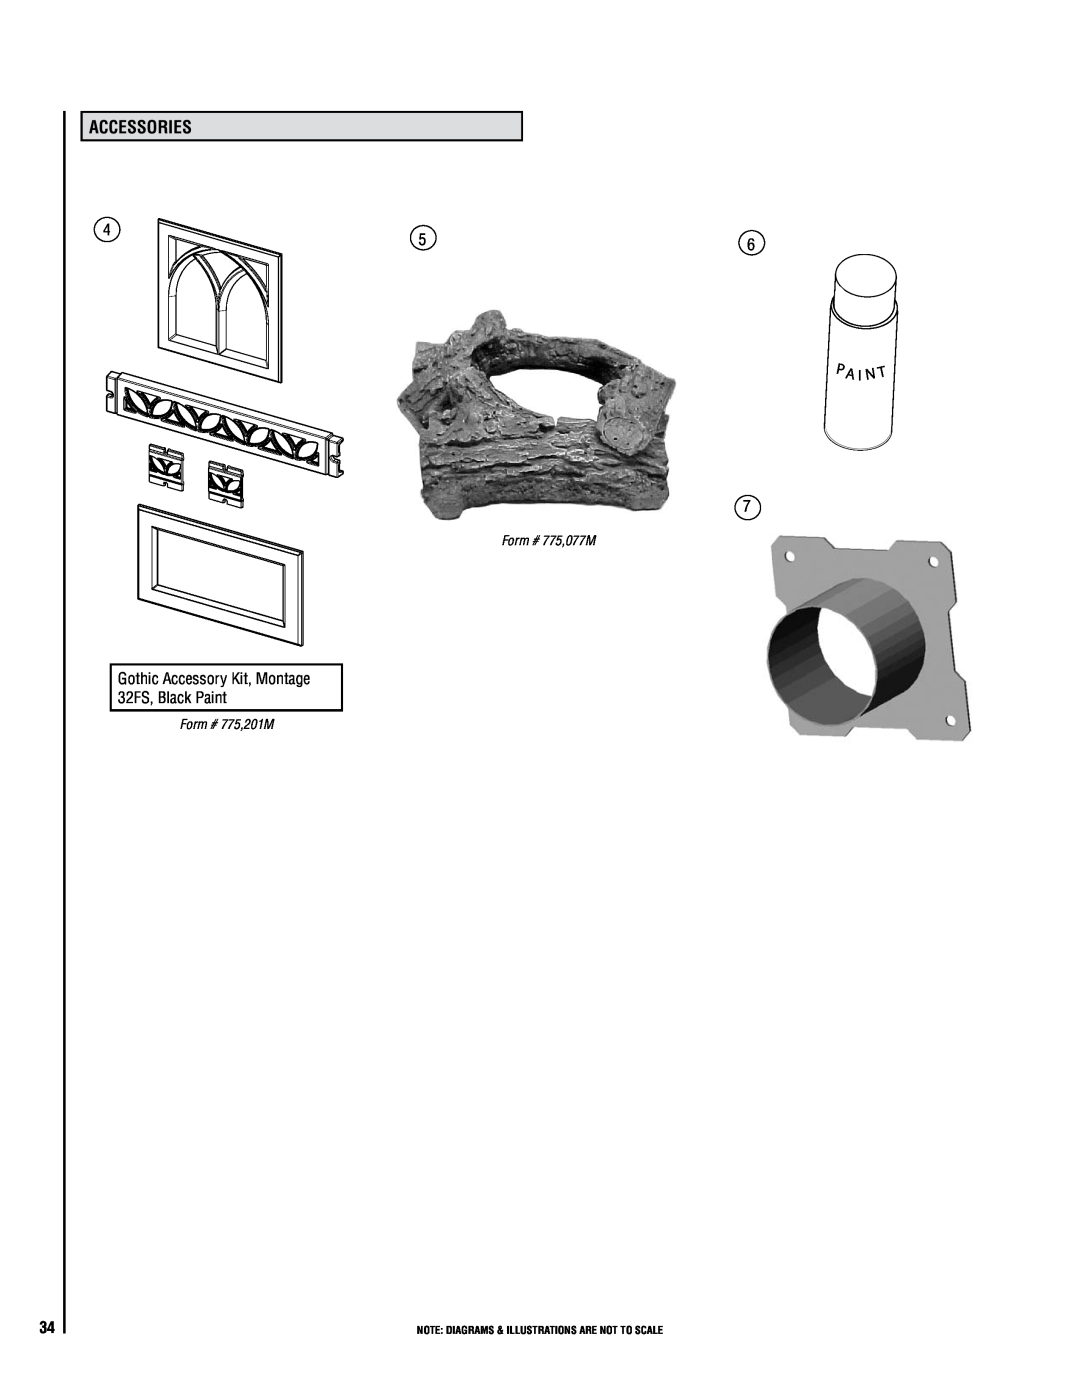 Lennox Hearth 32FS Accessories, A I N, Form # 775,077M, Form # 775,201M, Note Diagrams & Illustrations Are Not To Scale 